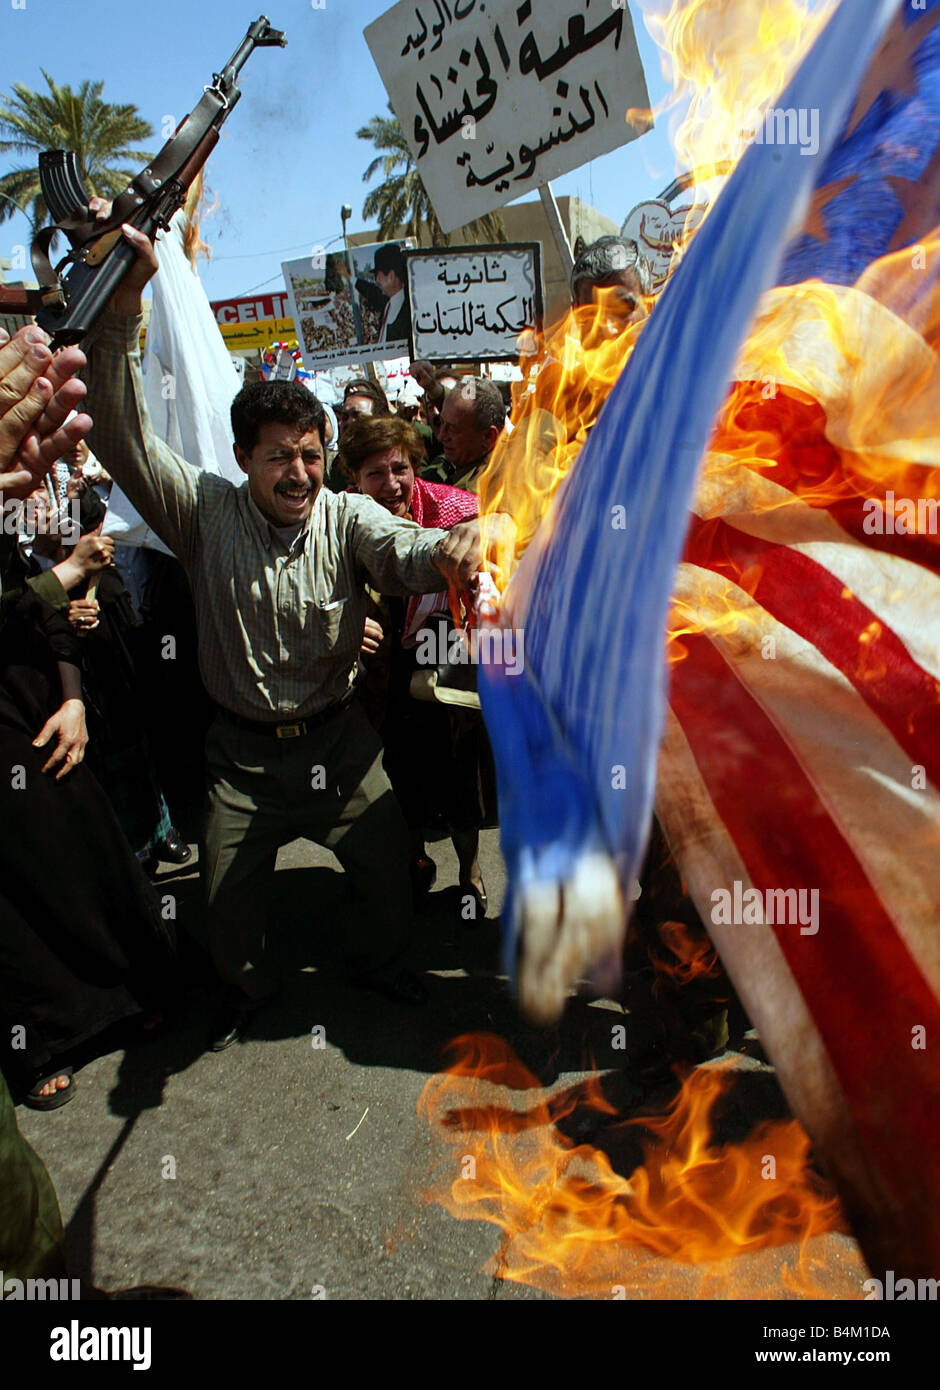 A Iraqi government sponsored Anti American demonstration on a Baghdad street prior to the US led invasion Our Picture Shows Protesters burn the American Stars and Stripes flag Stock Photo